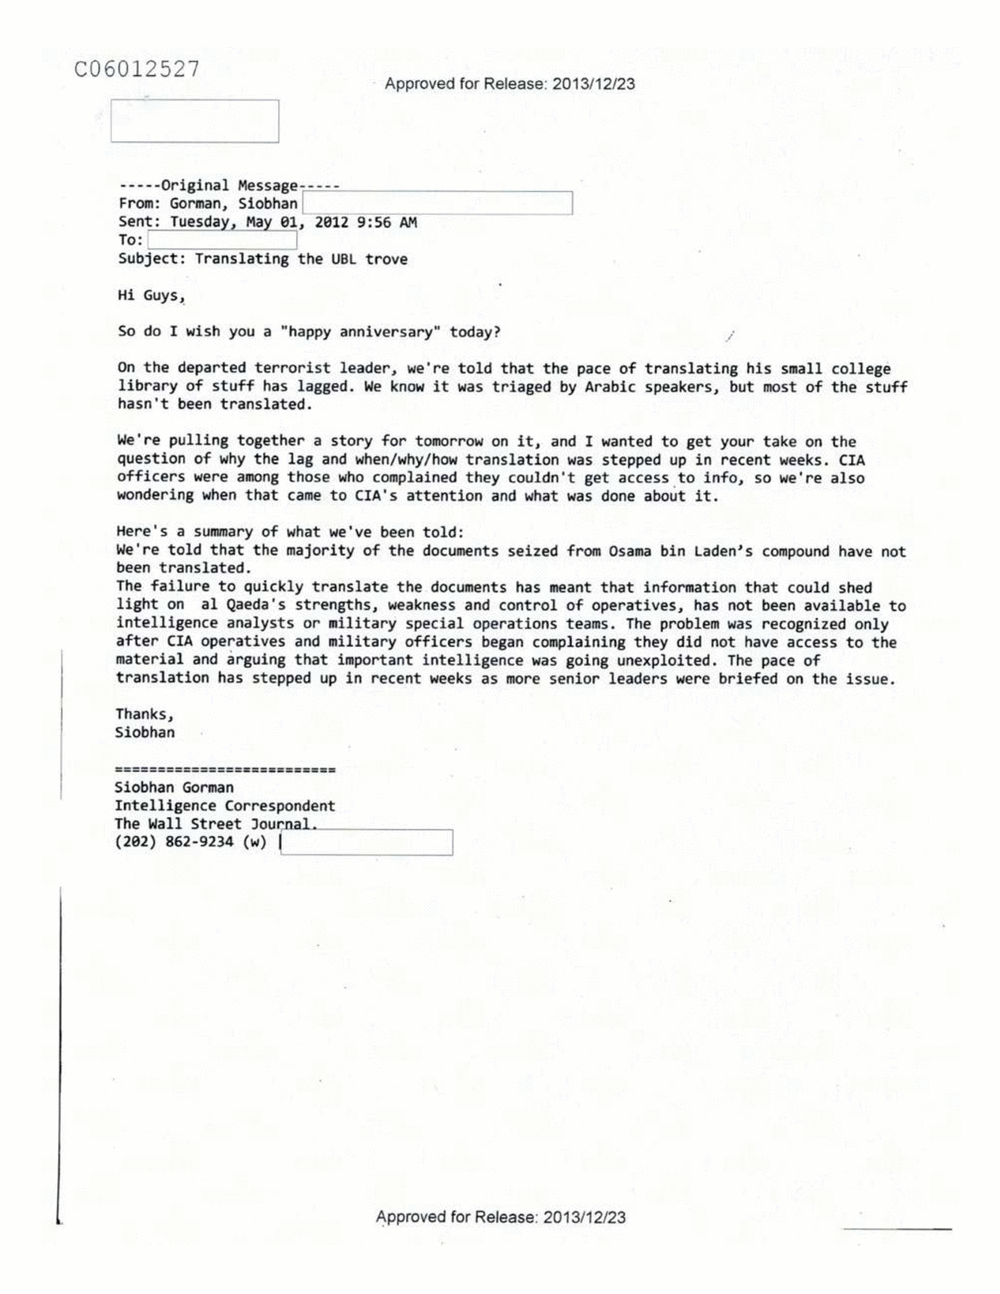 Page 52 from Email Correspondence Between Reporters and CIA Flacks